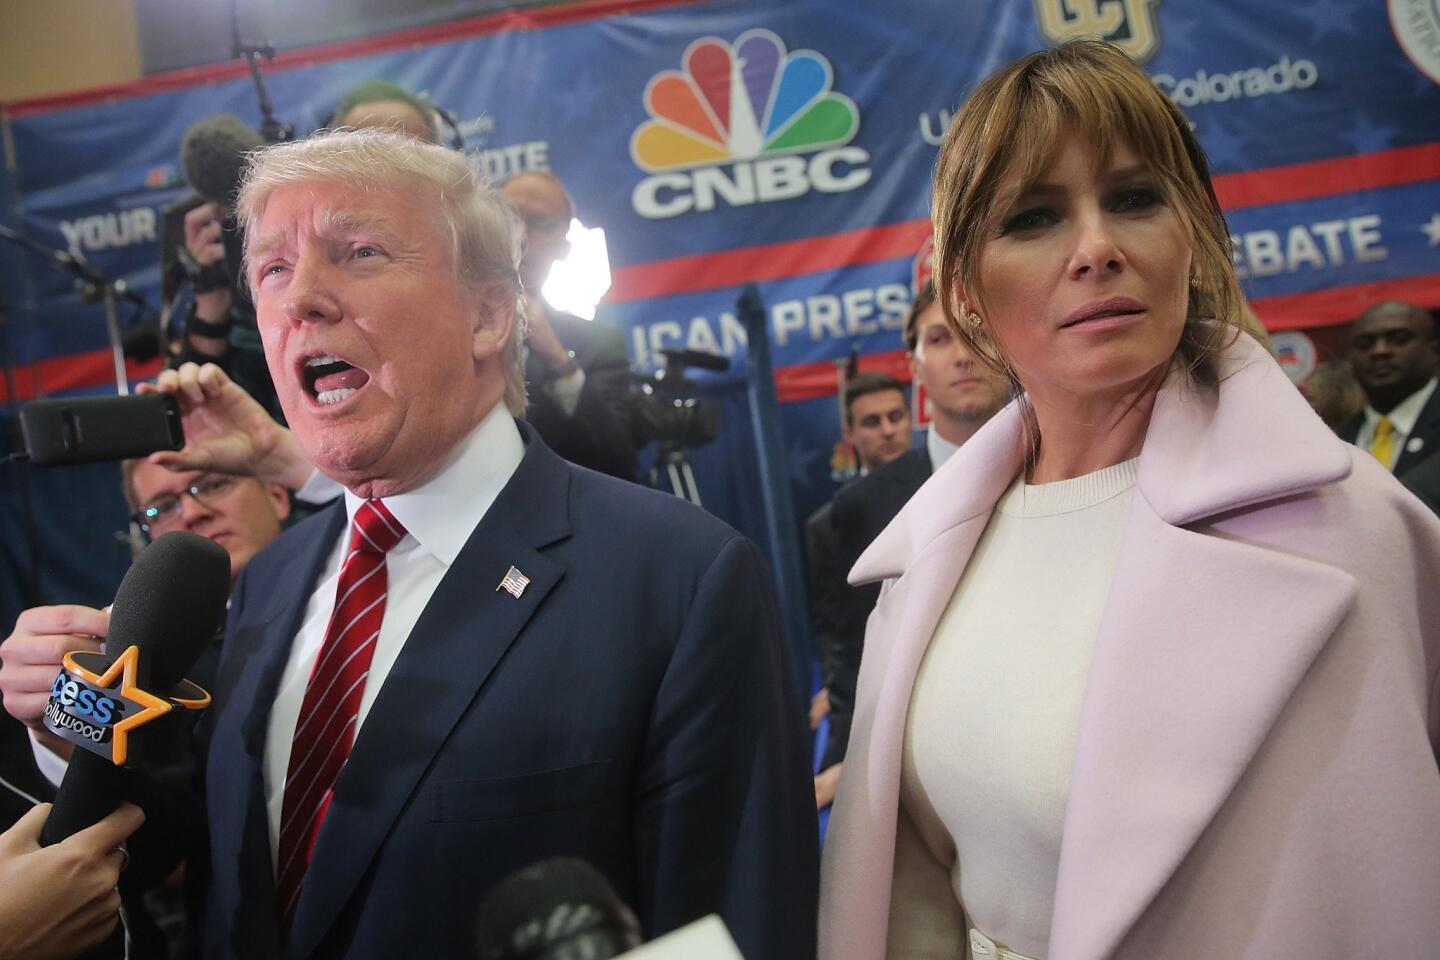 Melania Trump (R), wife of presidential candidate Donald Trump, listens to her husband speak to the media in the spin room after the CNBC Republican Presidential Debate at University of Colorado's Coors Events Center in Boulder, Colo.